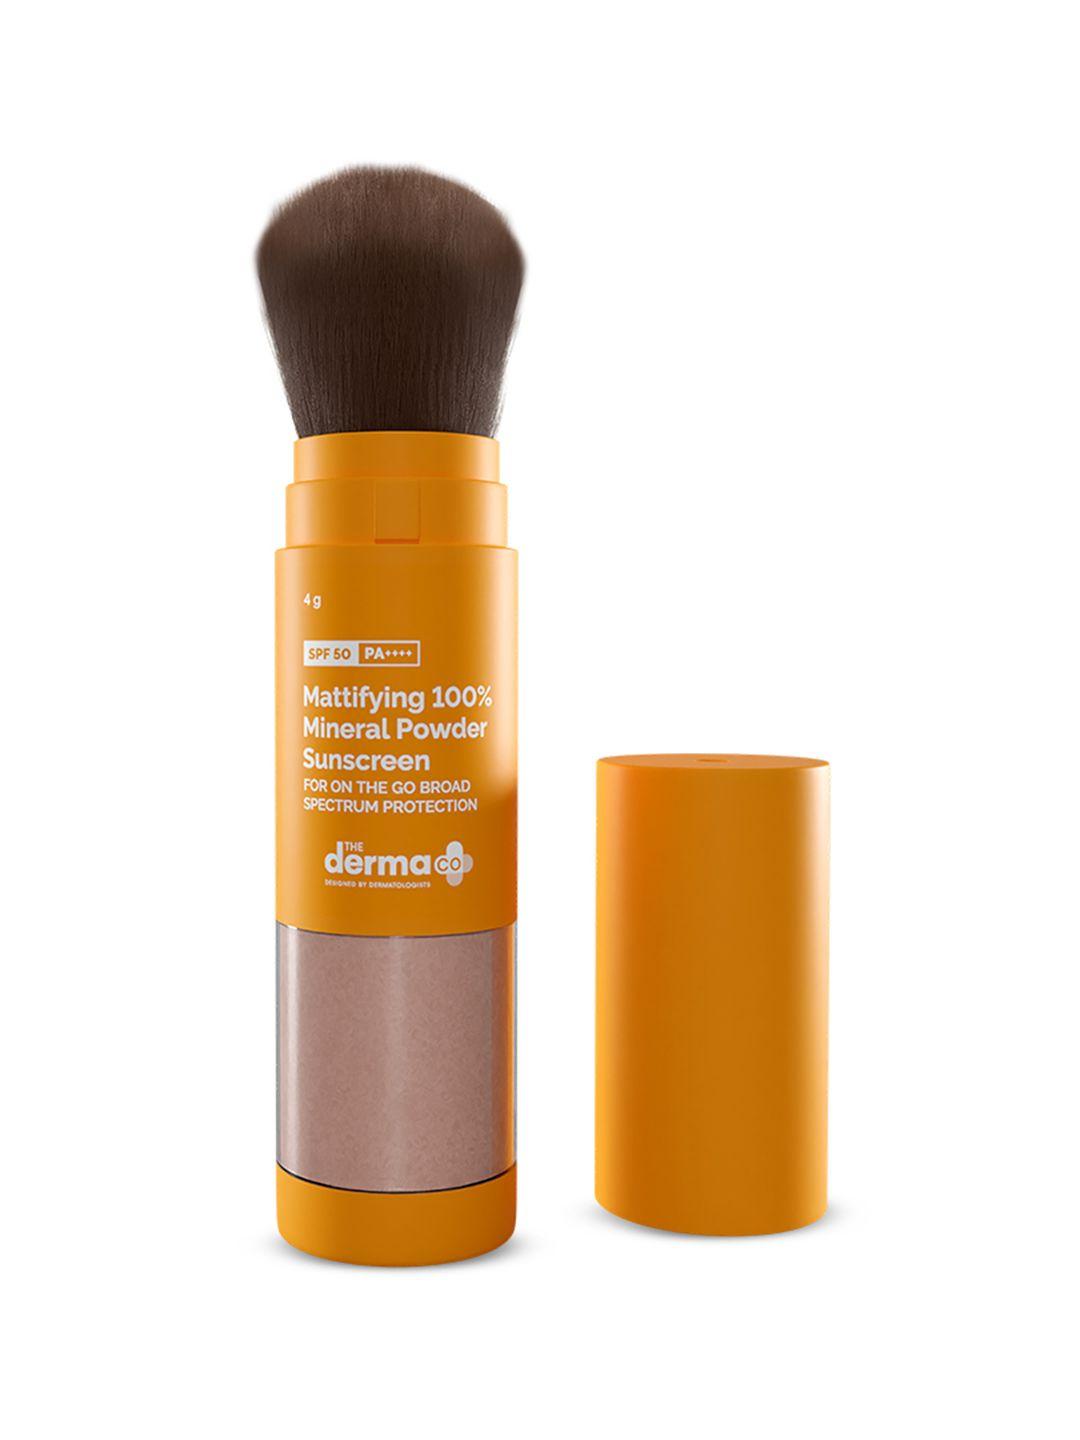 the-derma-co.-mattifying-100%-mineral-powder-sunscreen-with-spf50-pa++++---4g